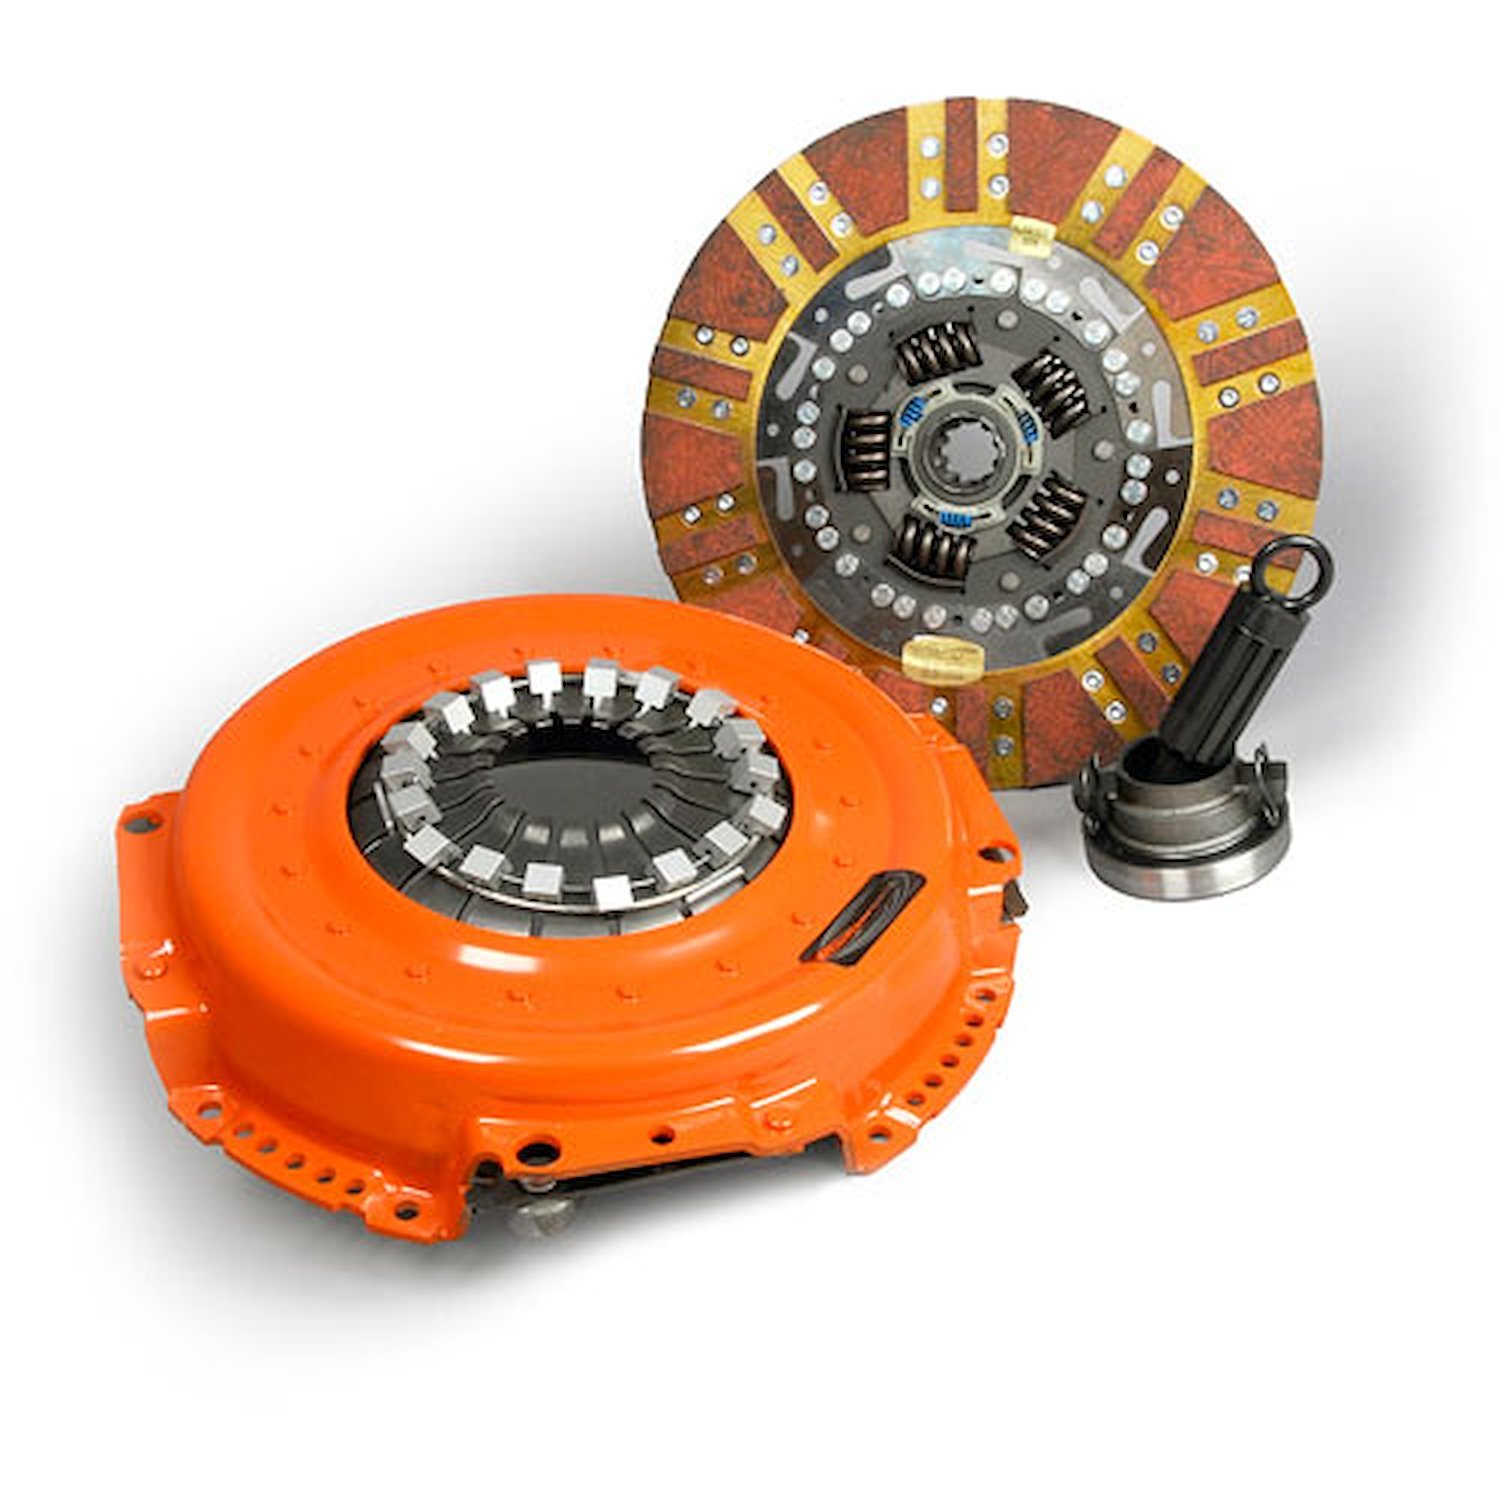 Dual Friction Clutch Includes Pressure Plate, Disc, Throwout Bearing, & Alignment Tool